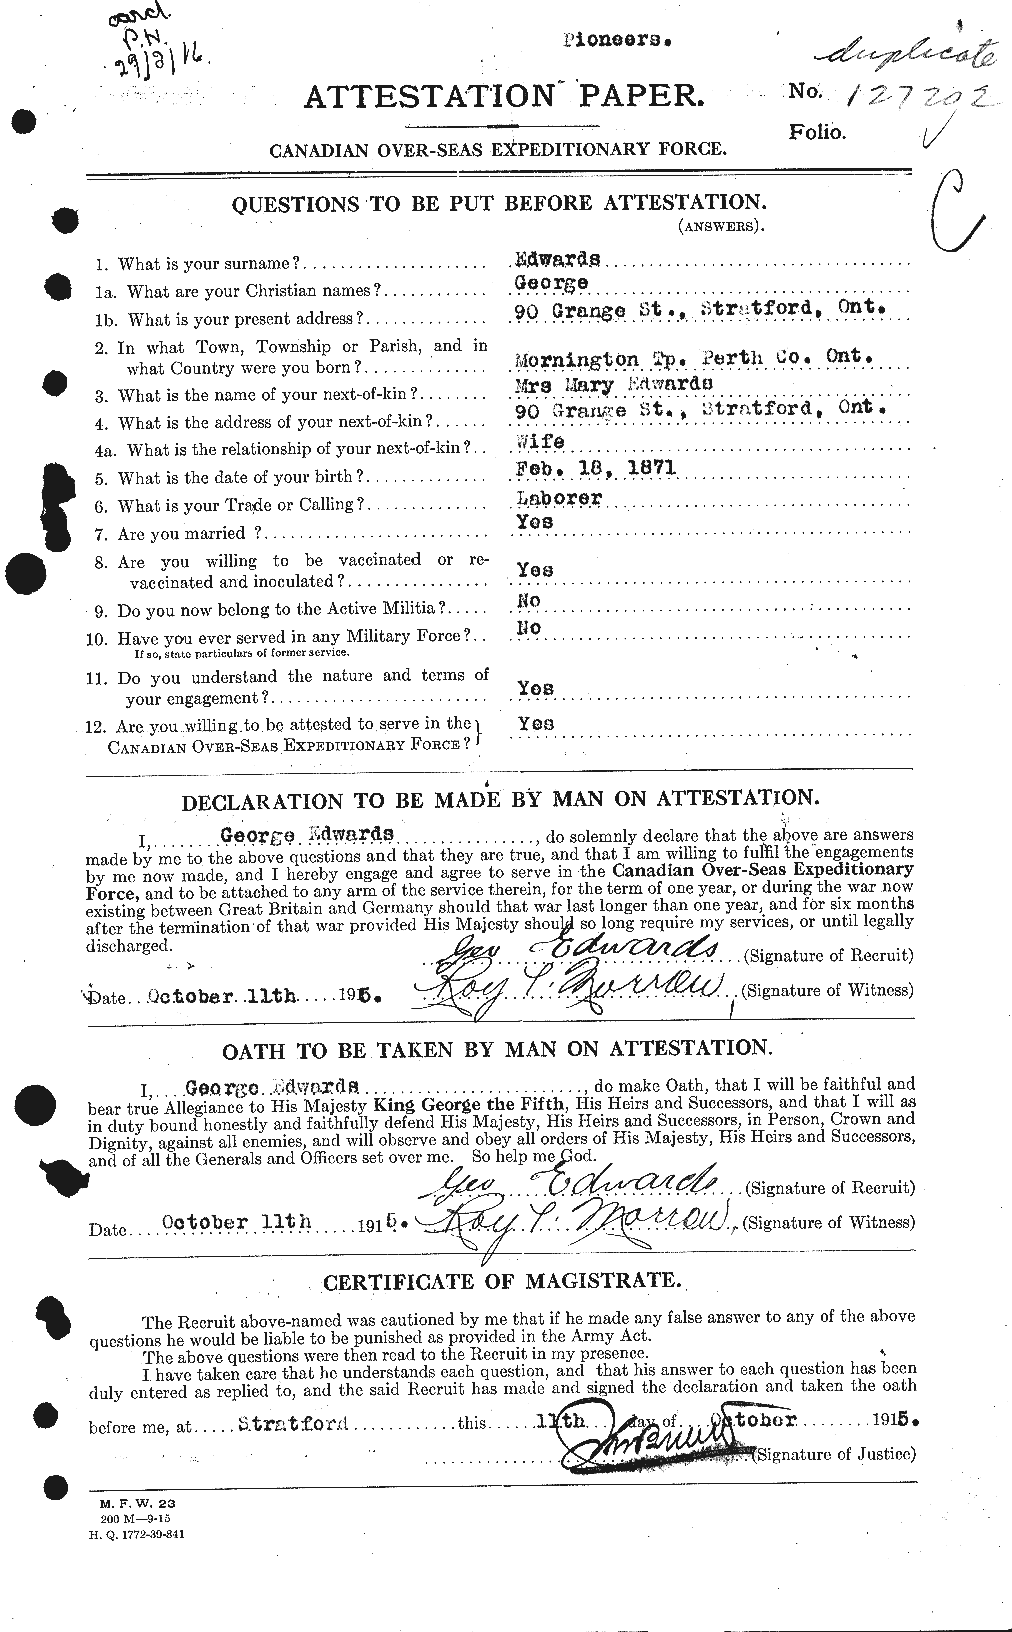 Personnel Records of the First World War - CEF 309101a